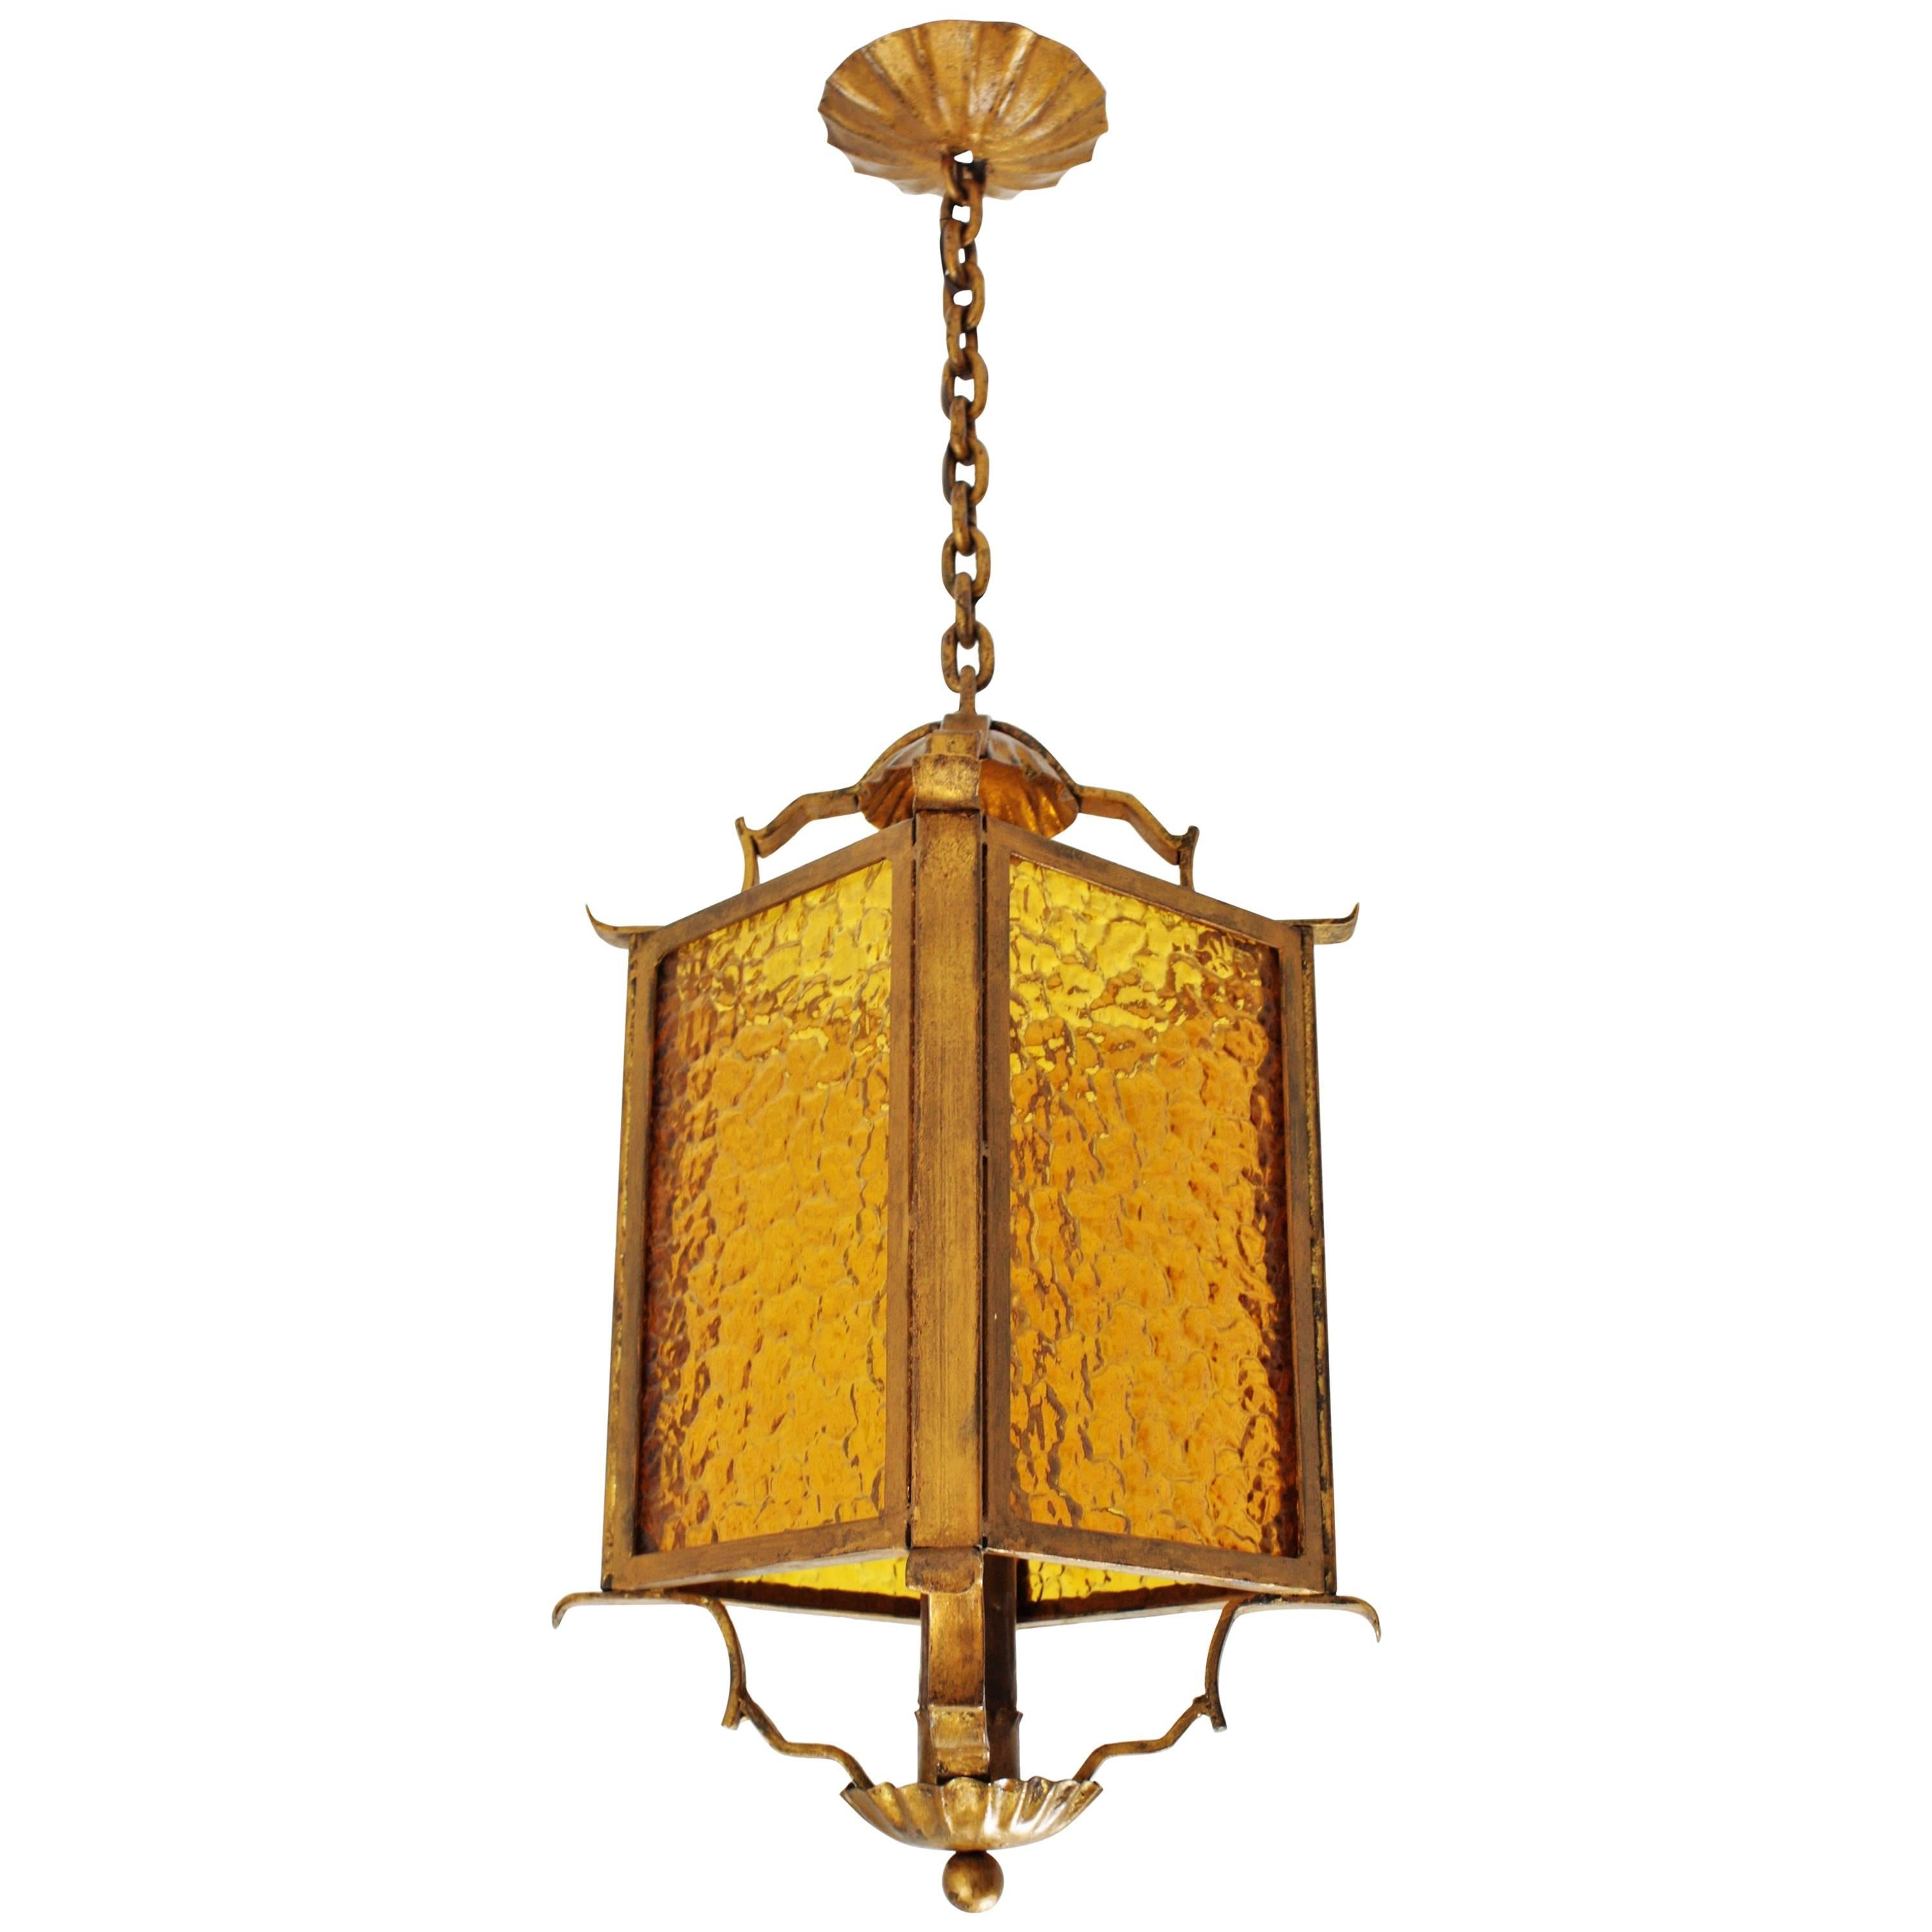 Sculptural gilt iron pagoda shaped pendant / lantern, Spain, 1930s.
This oriental hanging light pendant features a pagoda shape wrought iron chandelier. It has an structure with four sides comprised by a textured glass amber panel. It wears its